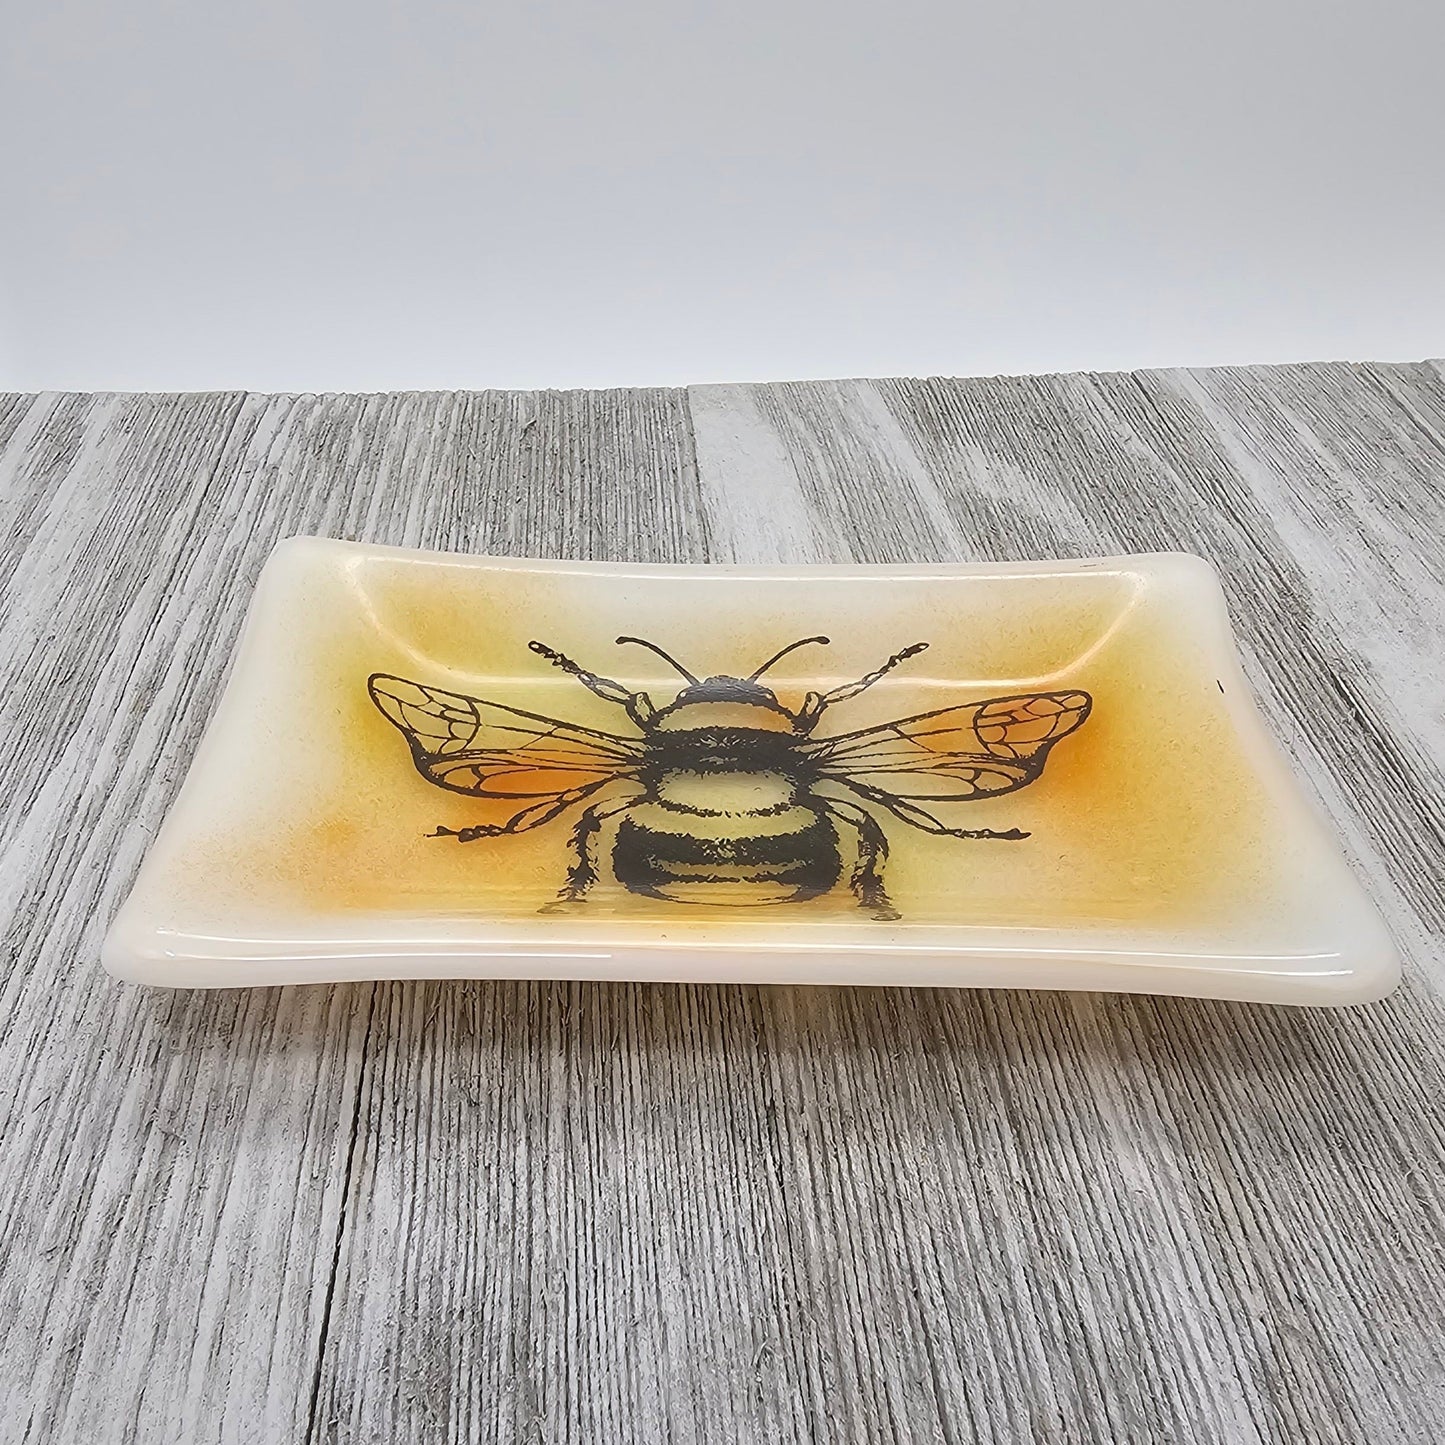 Bumble Bee Dish, Fused Glass Dish, Yellow and White